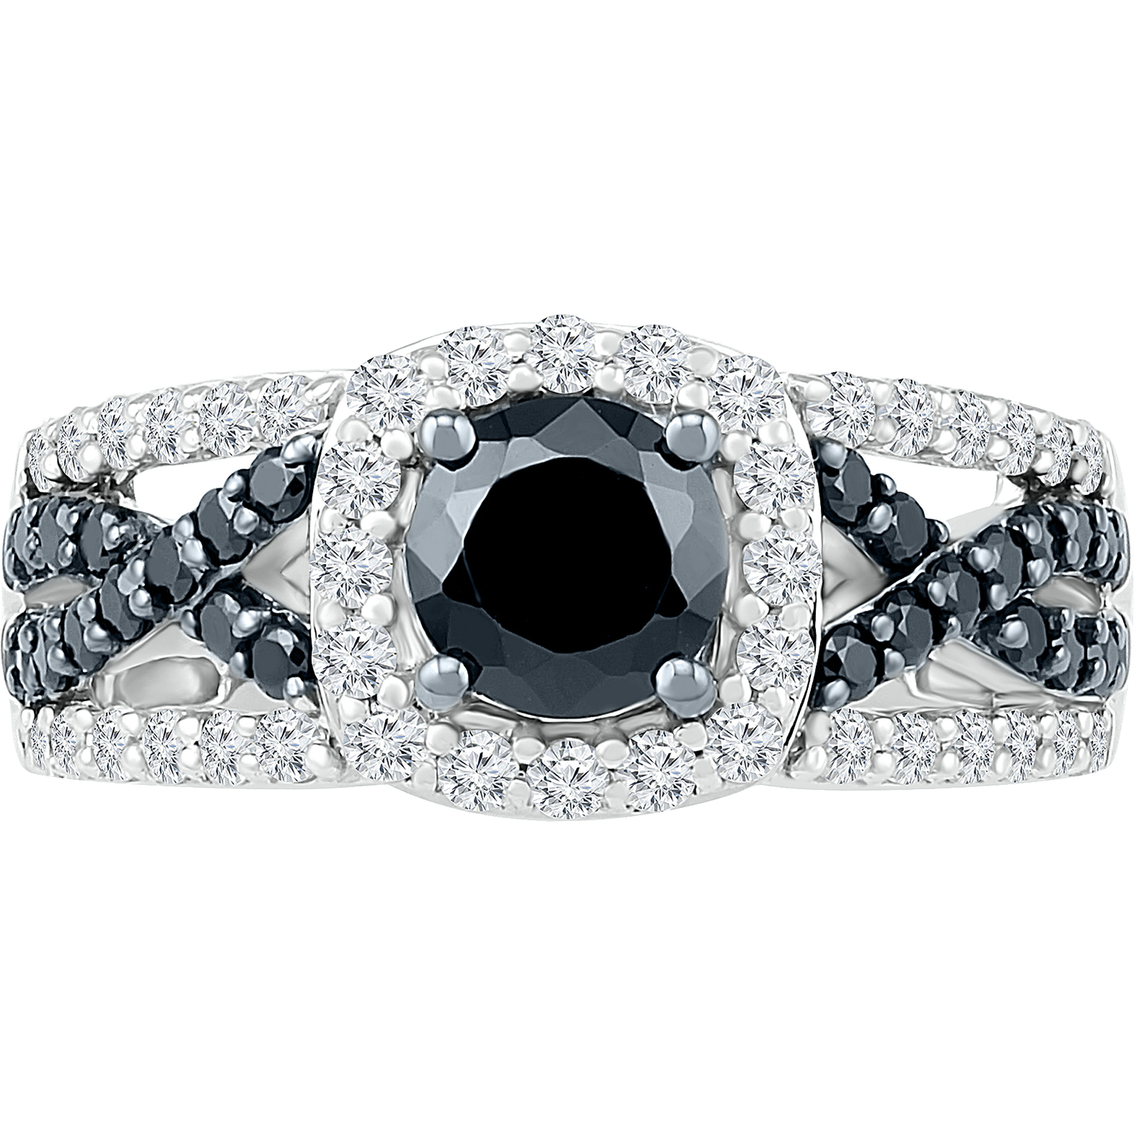 10K Gold 1 1/2 CTW Black and White Diamond Engagement Ring - Image 2 of 2